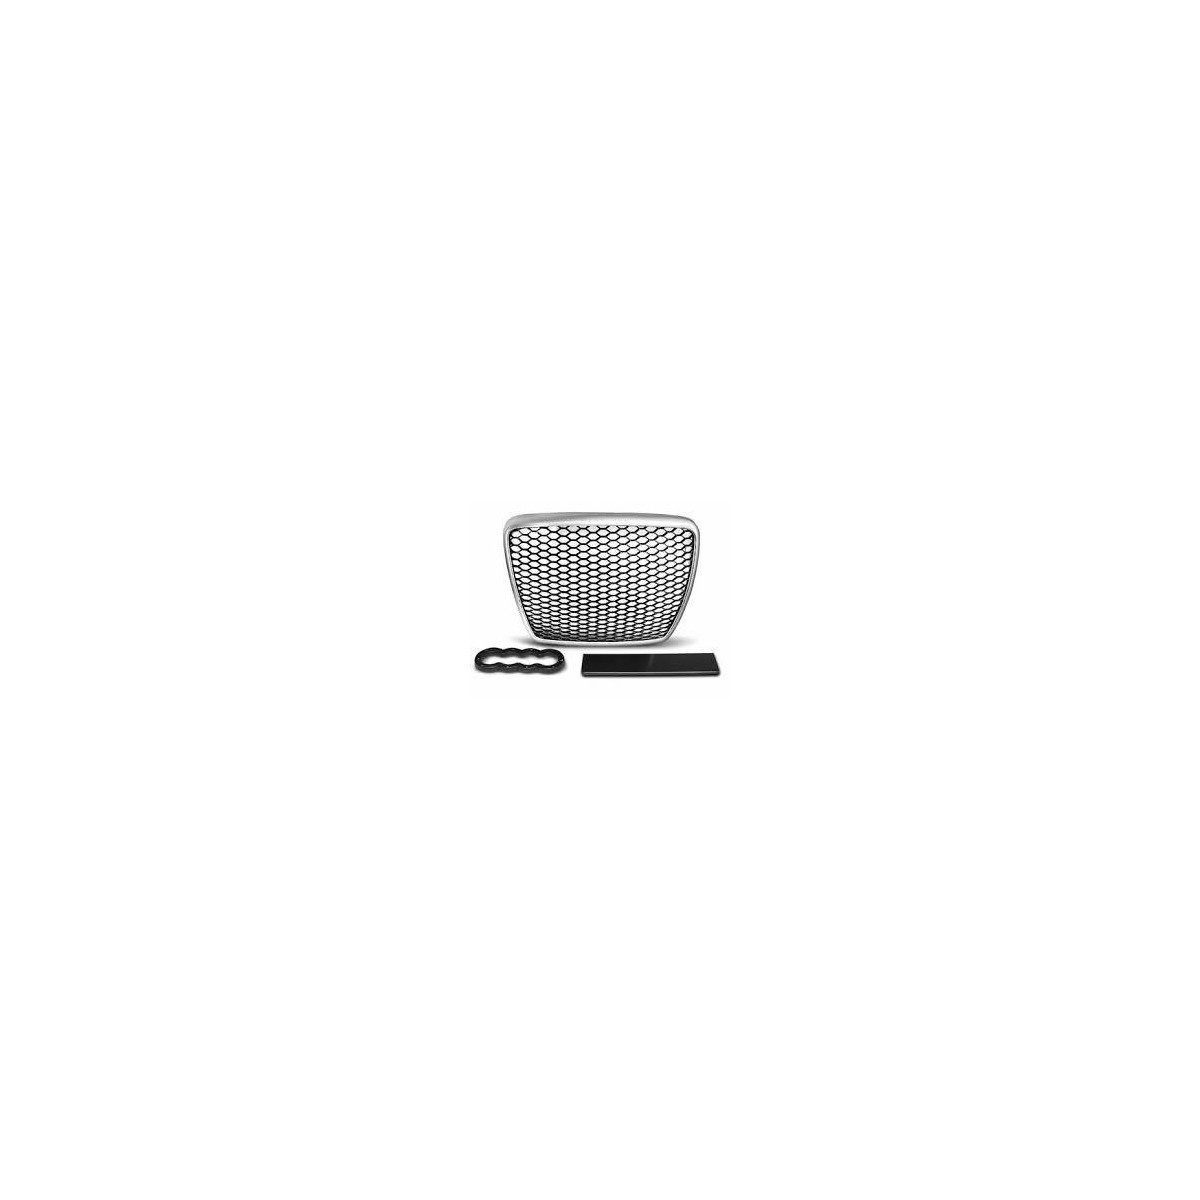 GRILL AUDI A6 C6 09-11 SILVER RS-STYLE